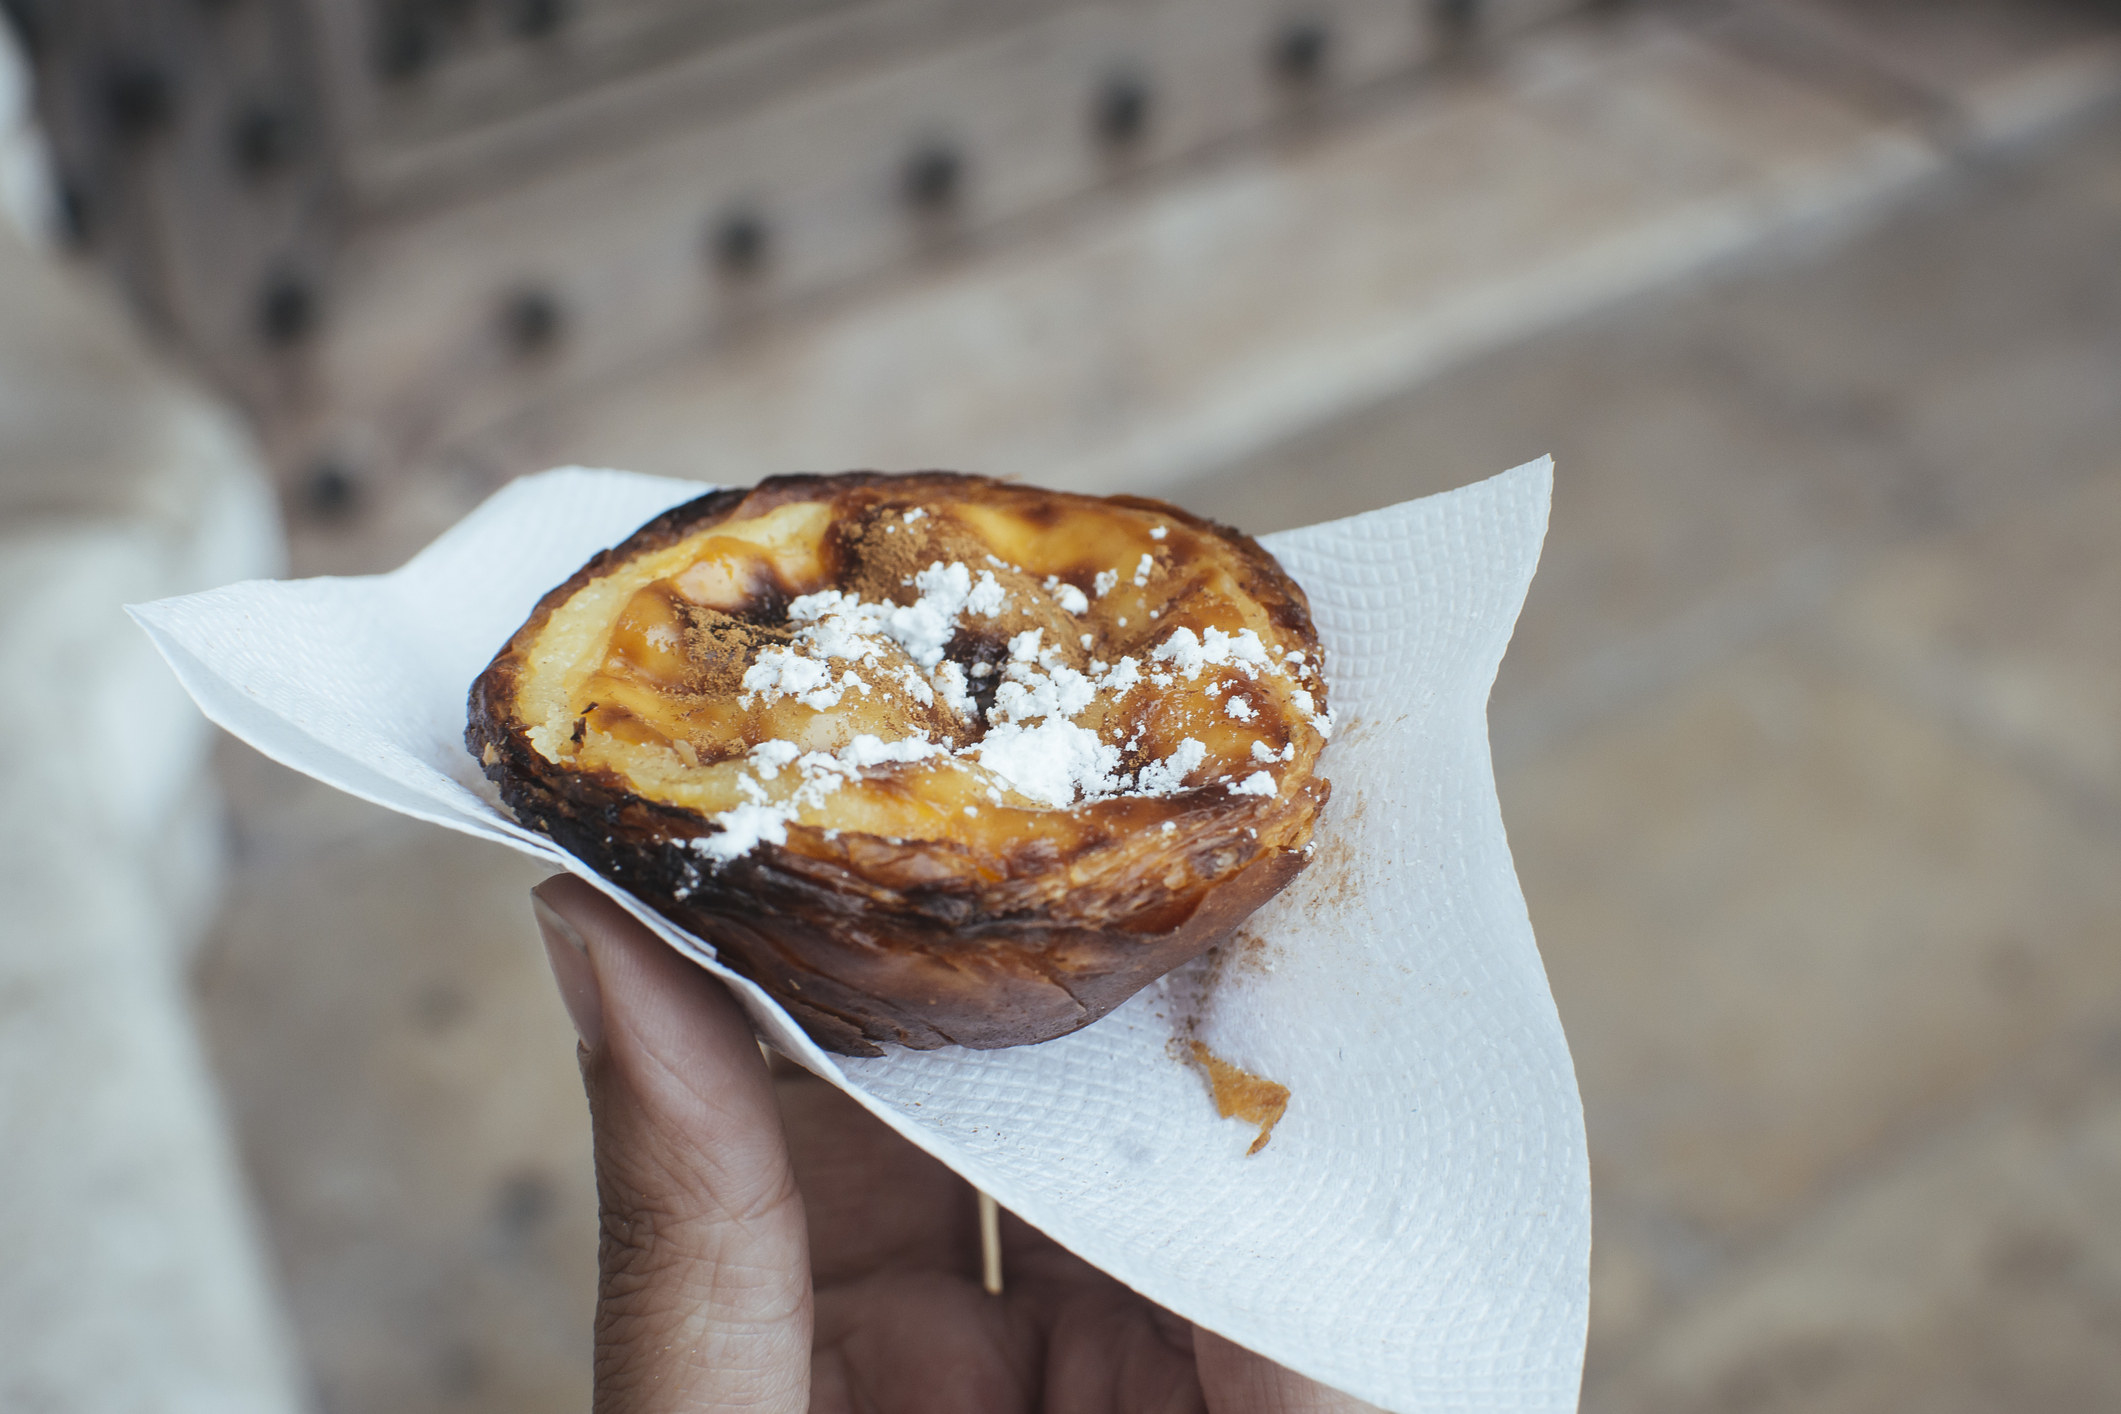 A Portuguese egg tart with sugar on top.